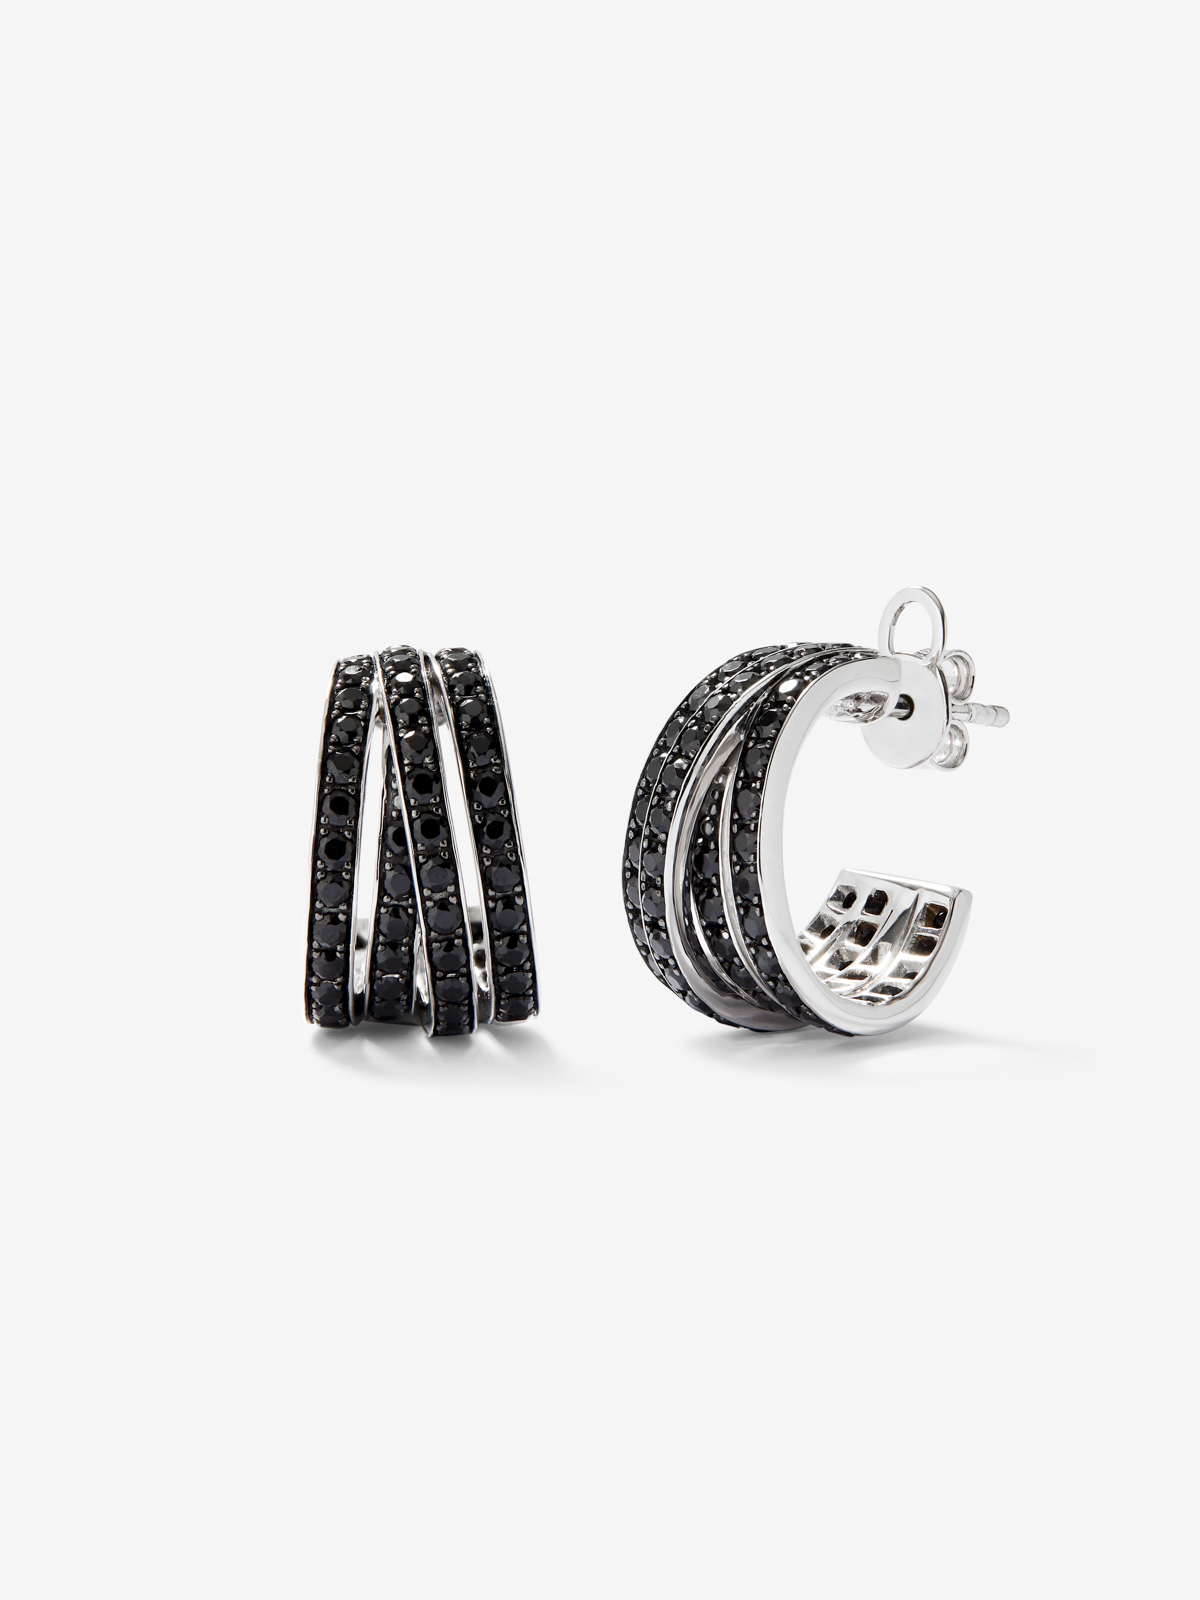 Silver earrings with black spiners